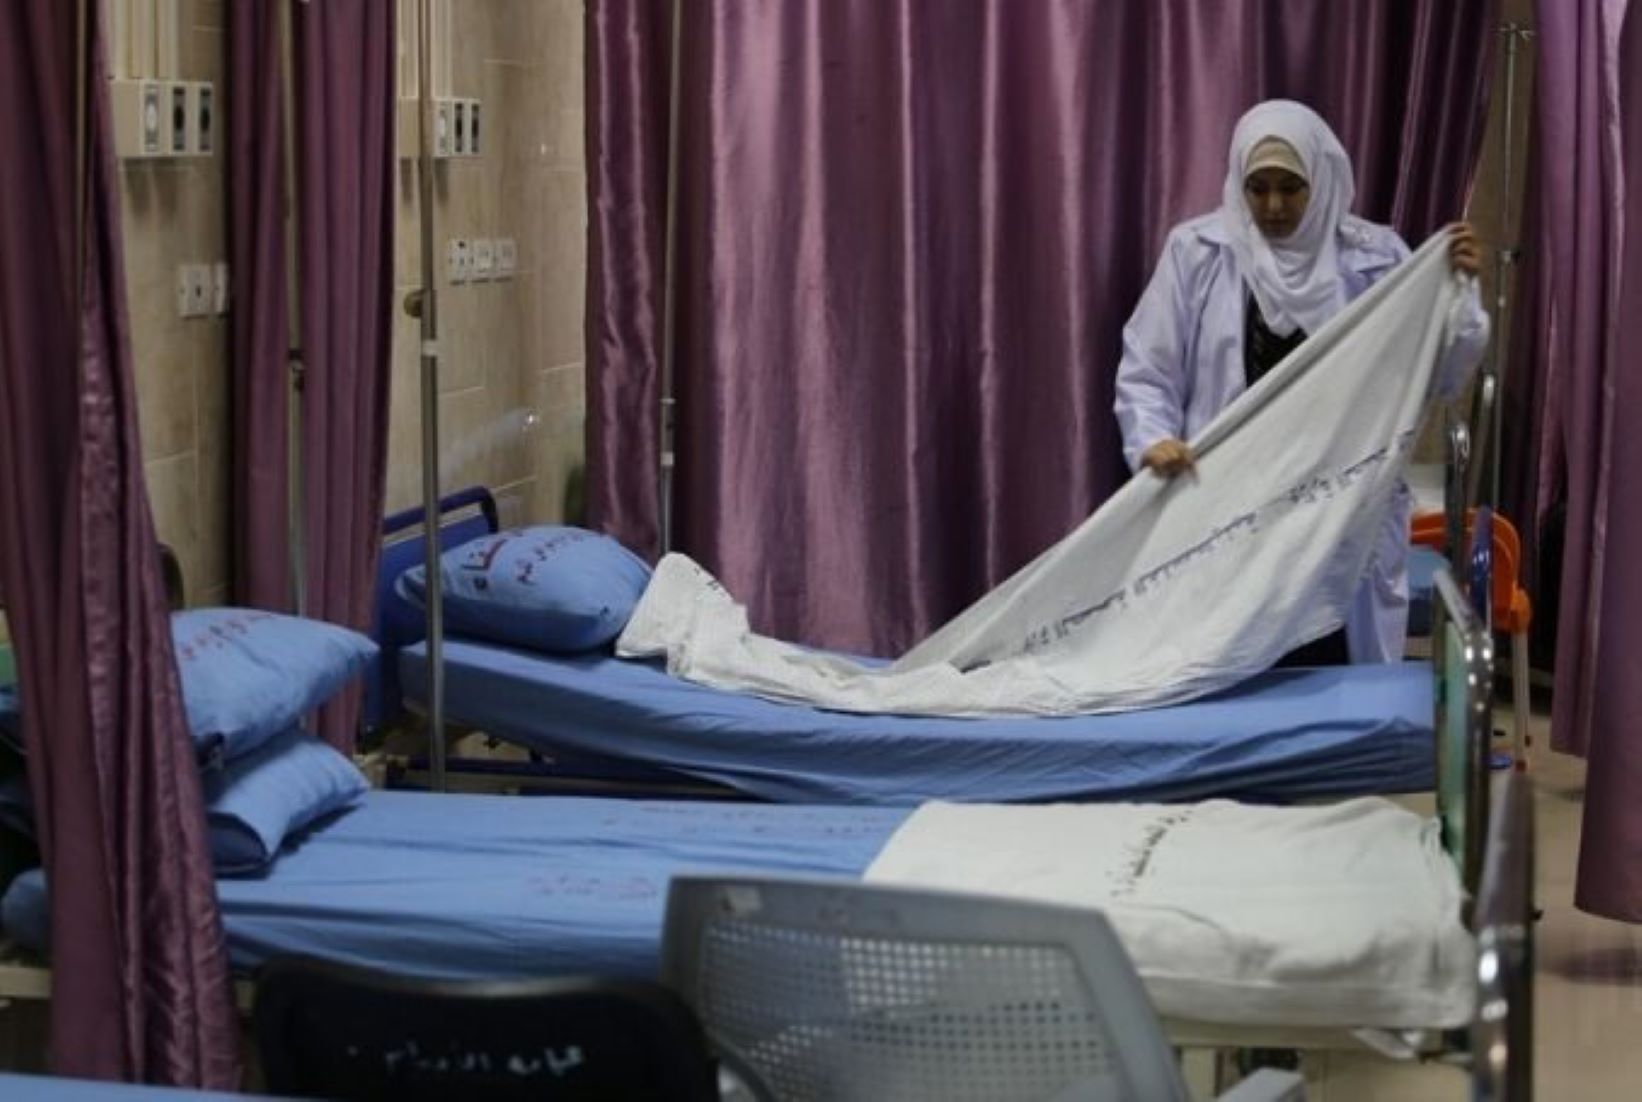 Gaza Kidney Patients’ Lives In Danger Due To Lack Of Medicines: Health Ministry